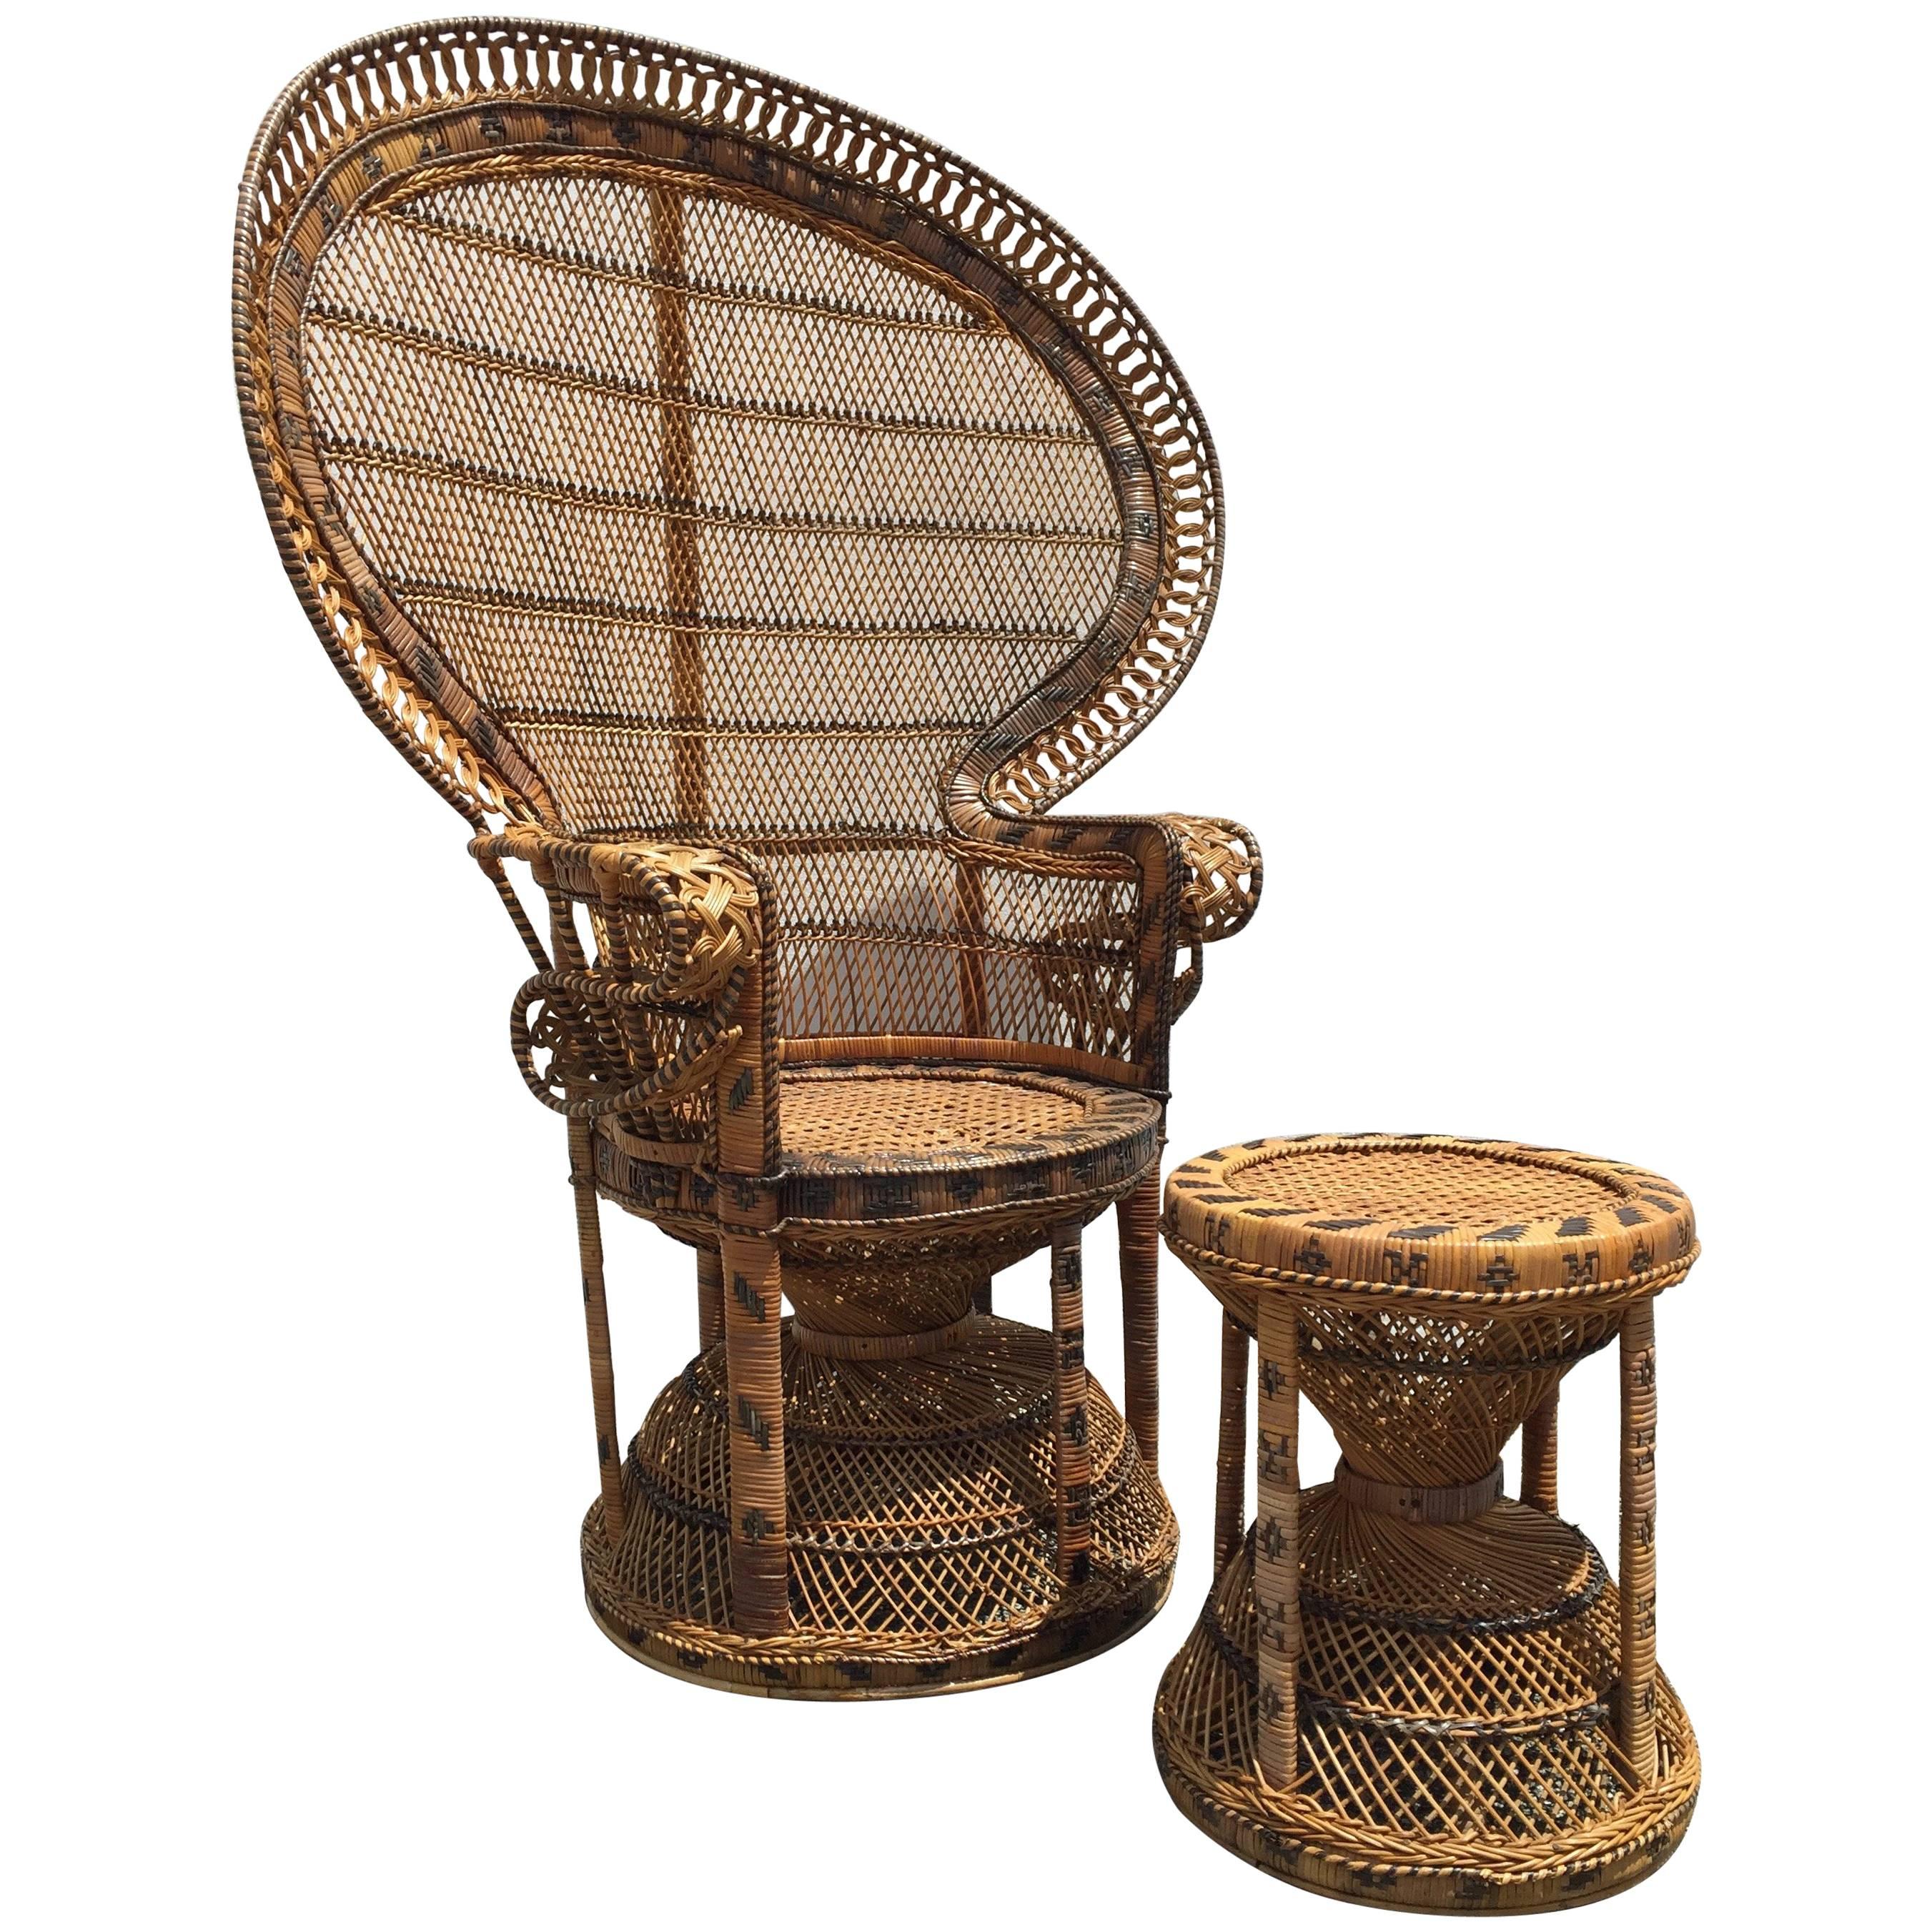 Iconic Rattan Two-Color Emmanuel Peacock Chair & Garden Seat, Restored